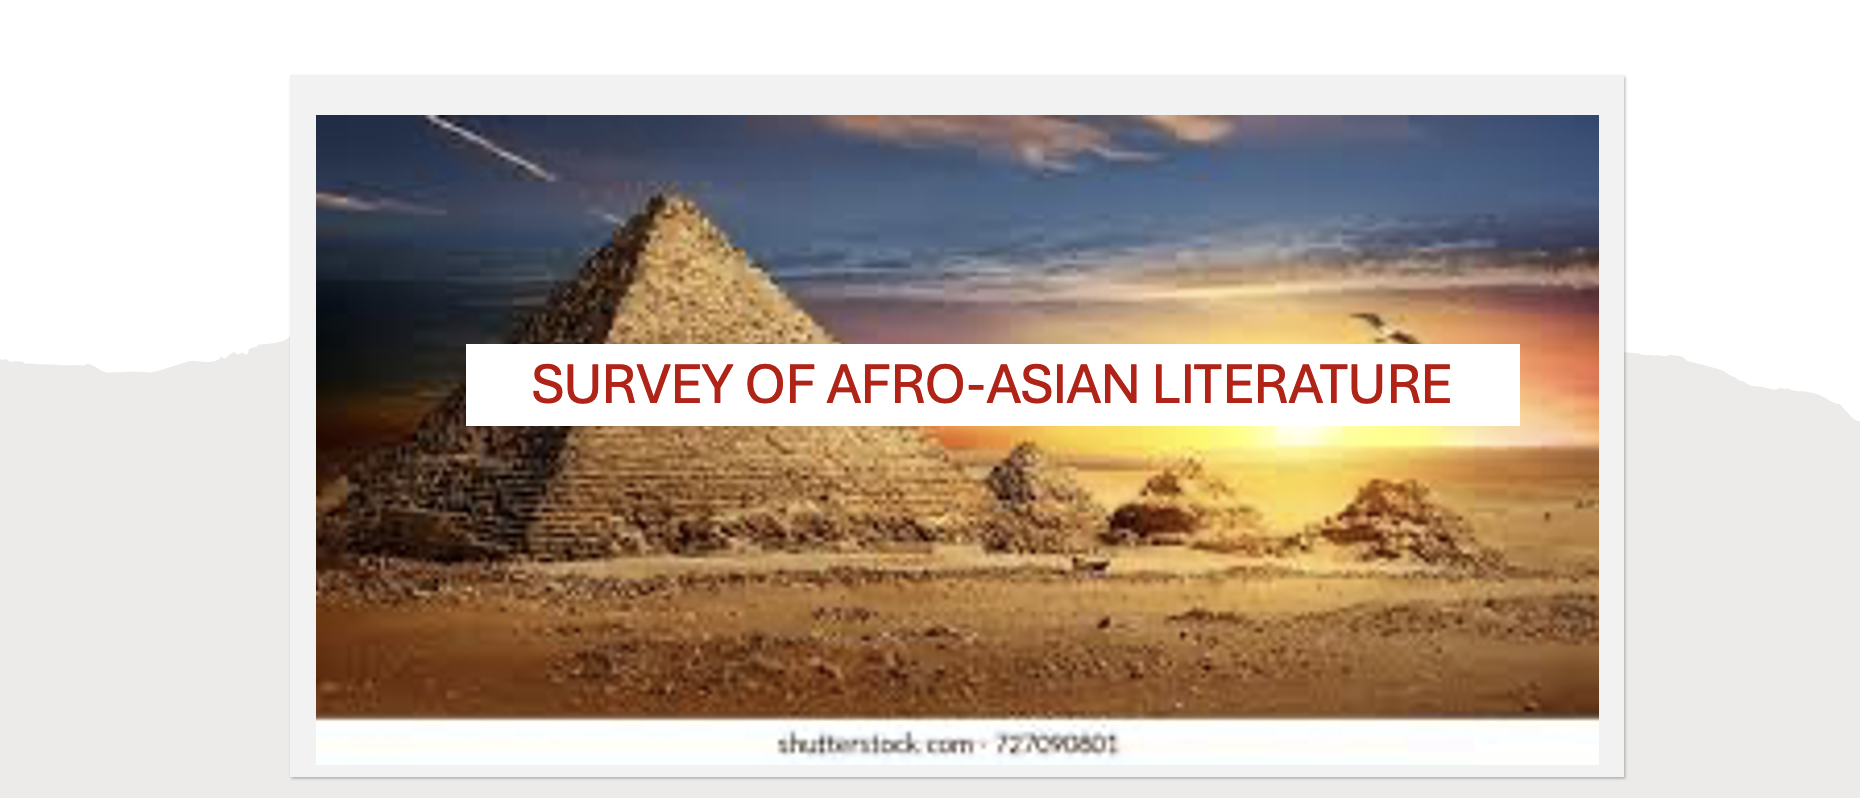 SURVEY OF AFRO-ASIAN LITERATURE